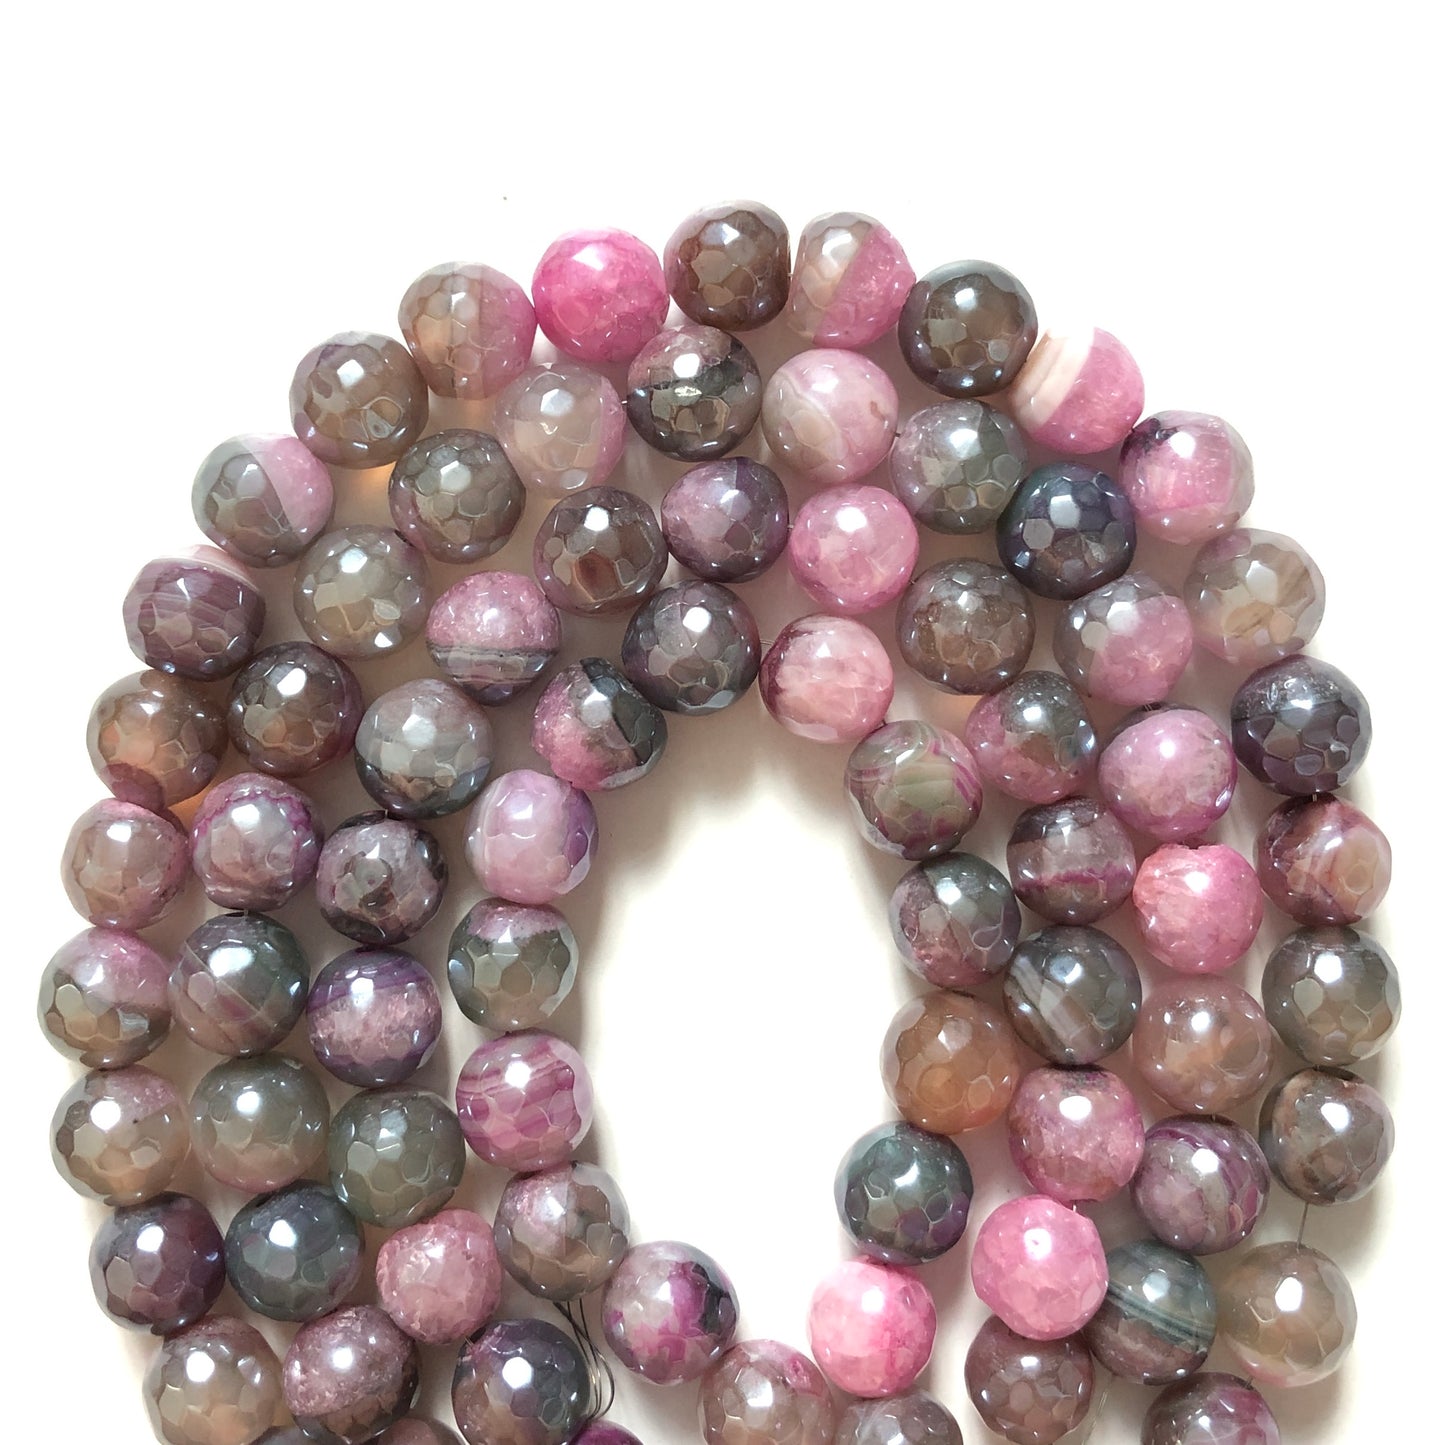 2 Strands/lot 10mm Pink Gray Electroplated Faceted Agate Stone Beads Electroplated Beads Electroplated Faceted Agate Beads New Beads Arrivals Charms Beads Beyond